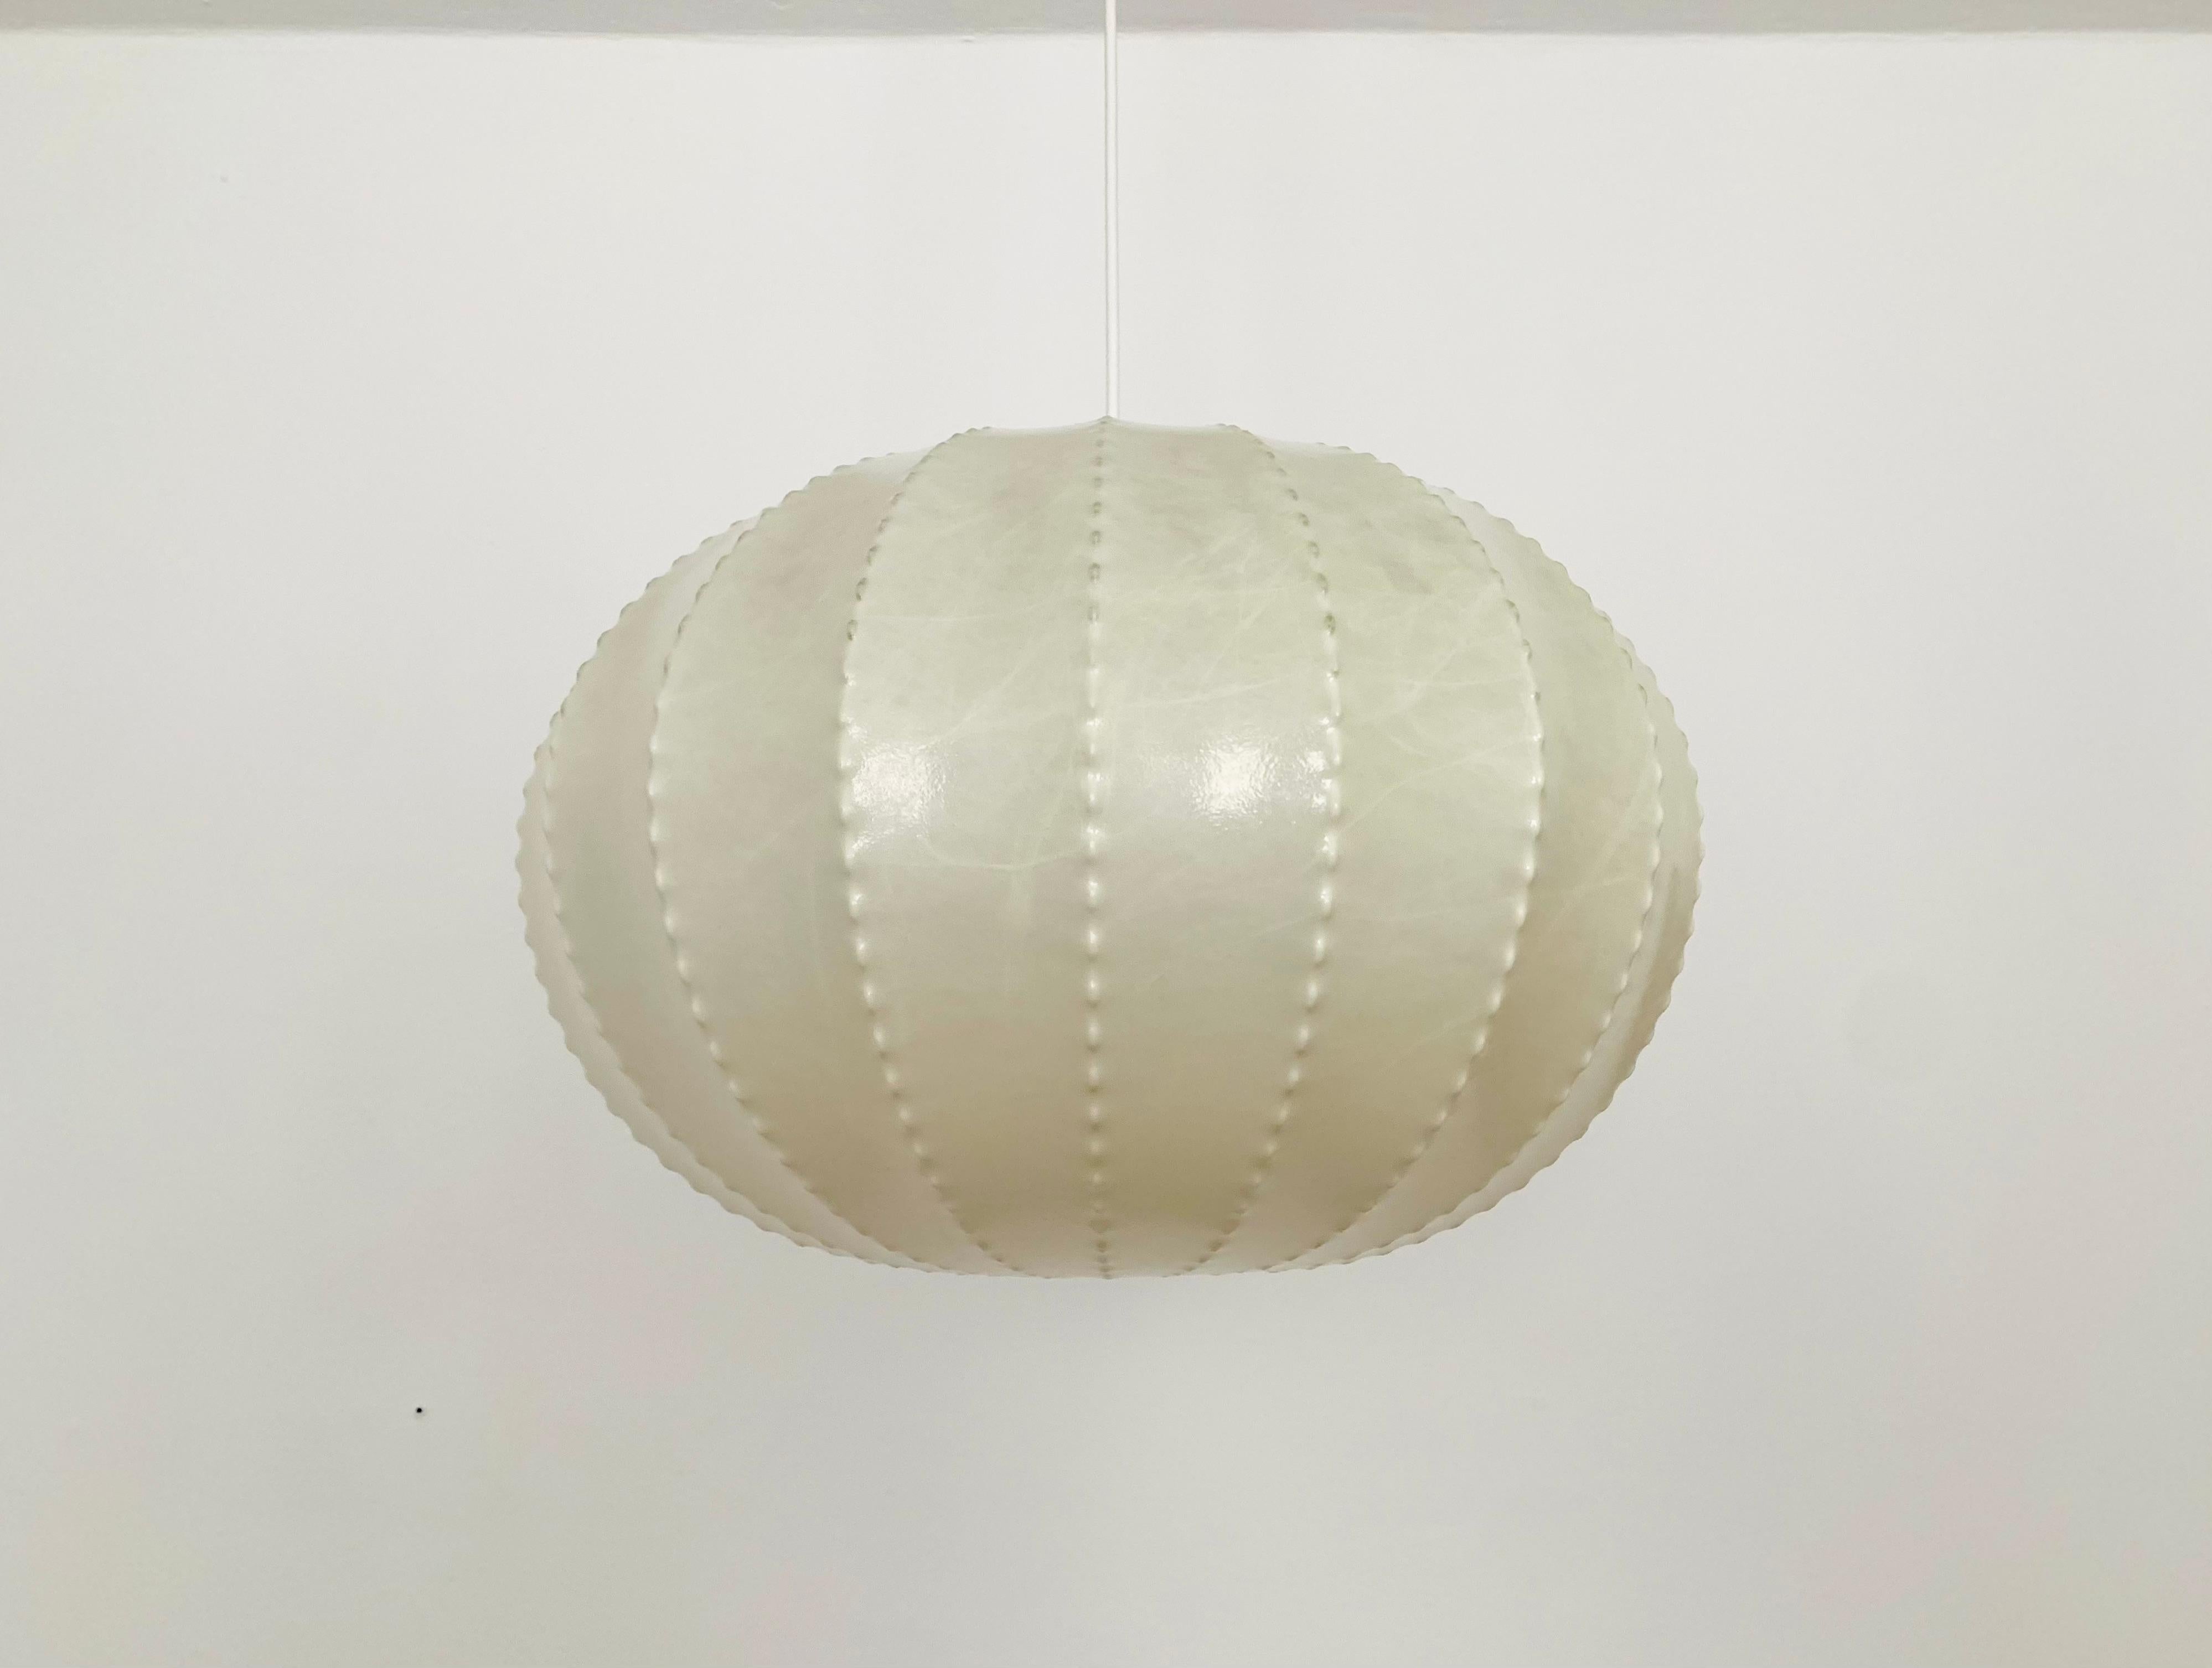 Very nice Cocoon pendant lamp from the 1960s.
Wonderful and contemporary design.
A highlight for every room.
The unusual shape creates a particularly cozy light.

Condition:

Very good vintage condition with minimal age-related signs of